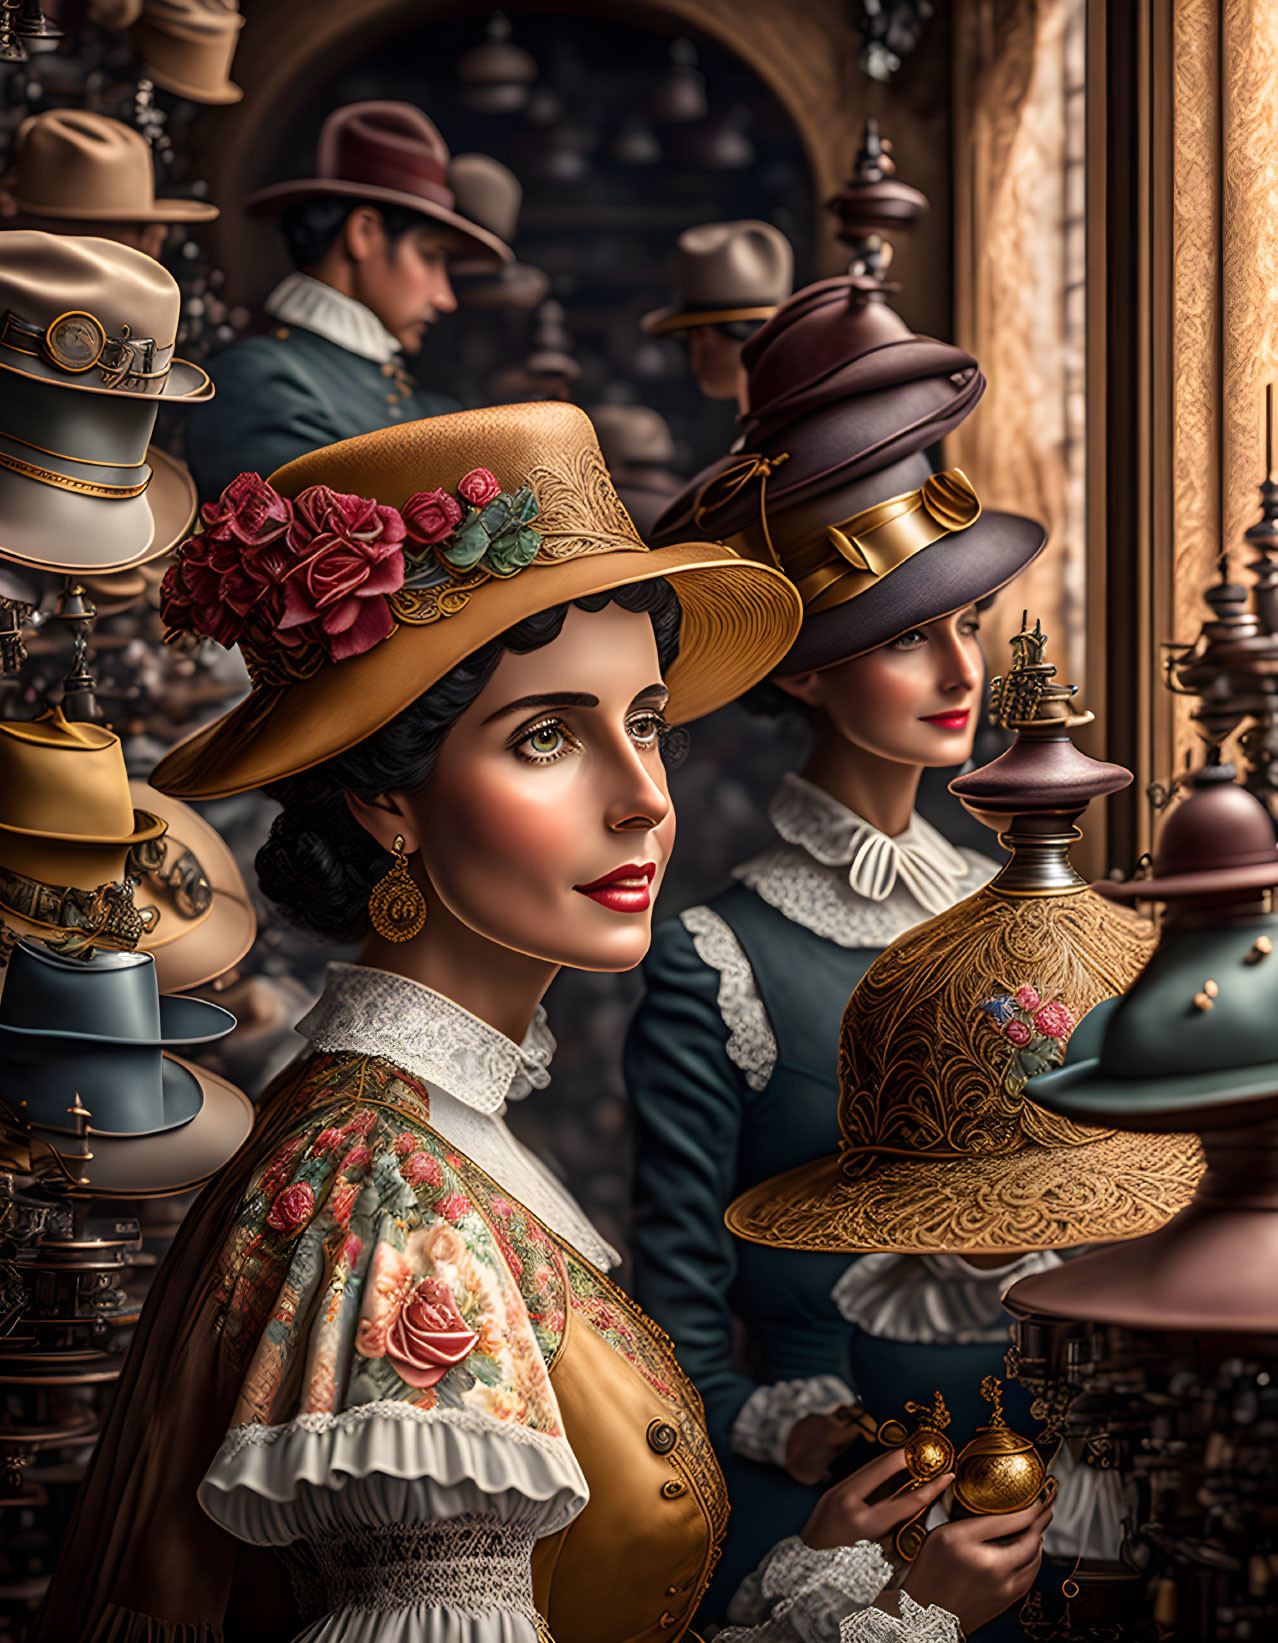 Victorian-era Women in Elegant Hats Surrounded by Mirrors